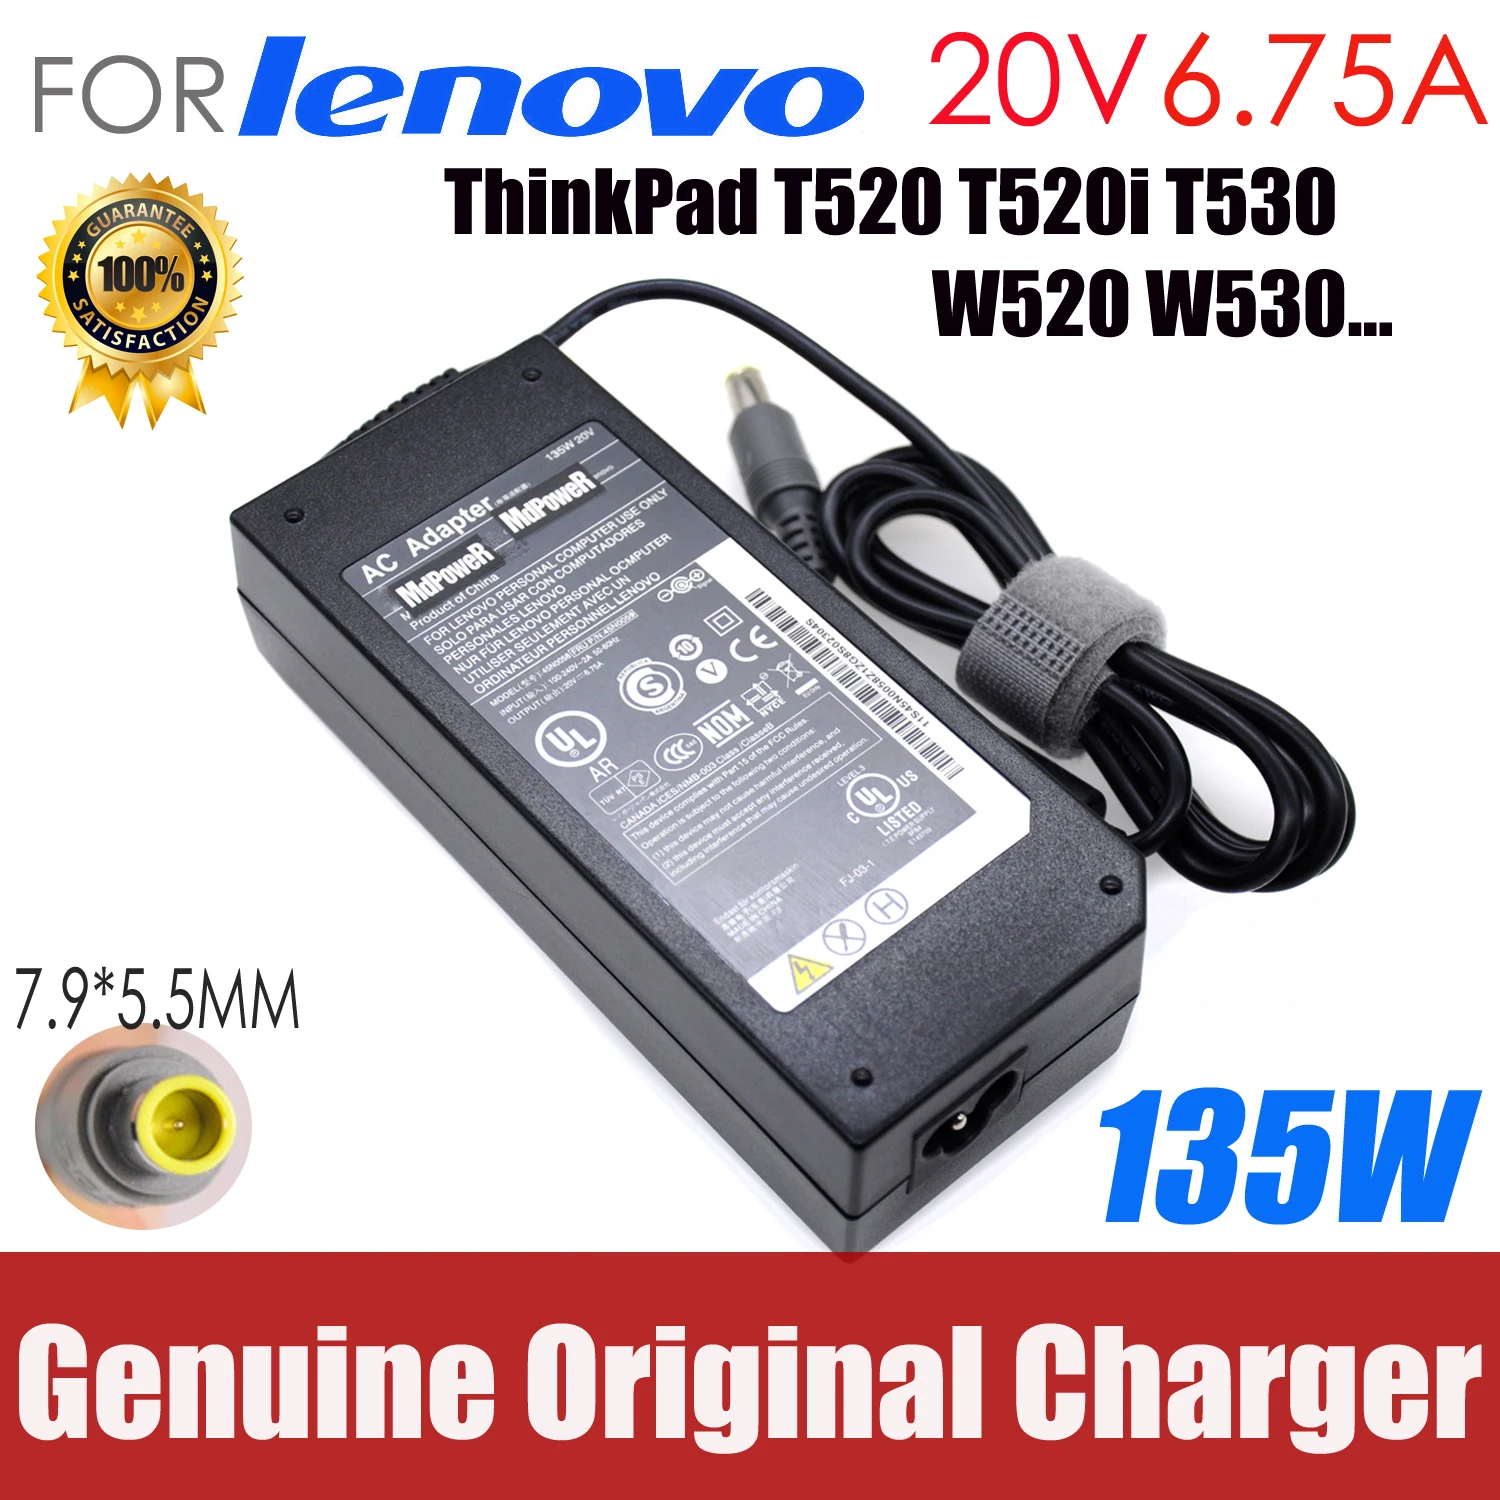 

Original 20V 6.75A 135W Laptop AC Adapter Charger FOR Lenovo ThinkPad T520 T520i T530 W520 W530 45N0058 45N0055 45N0059